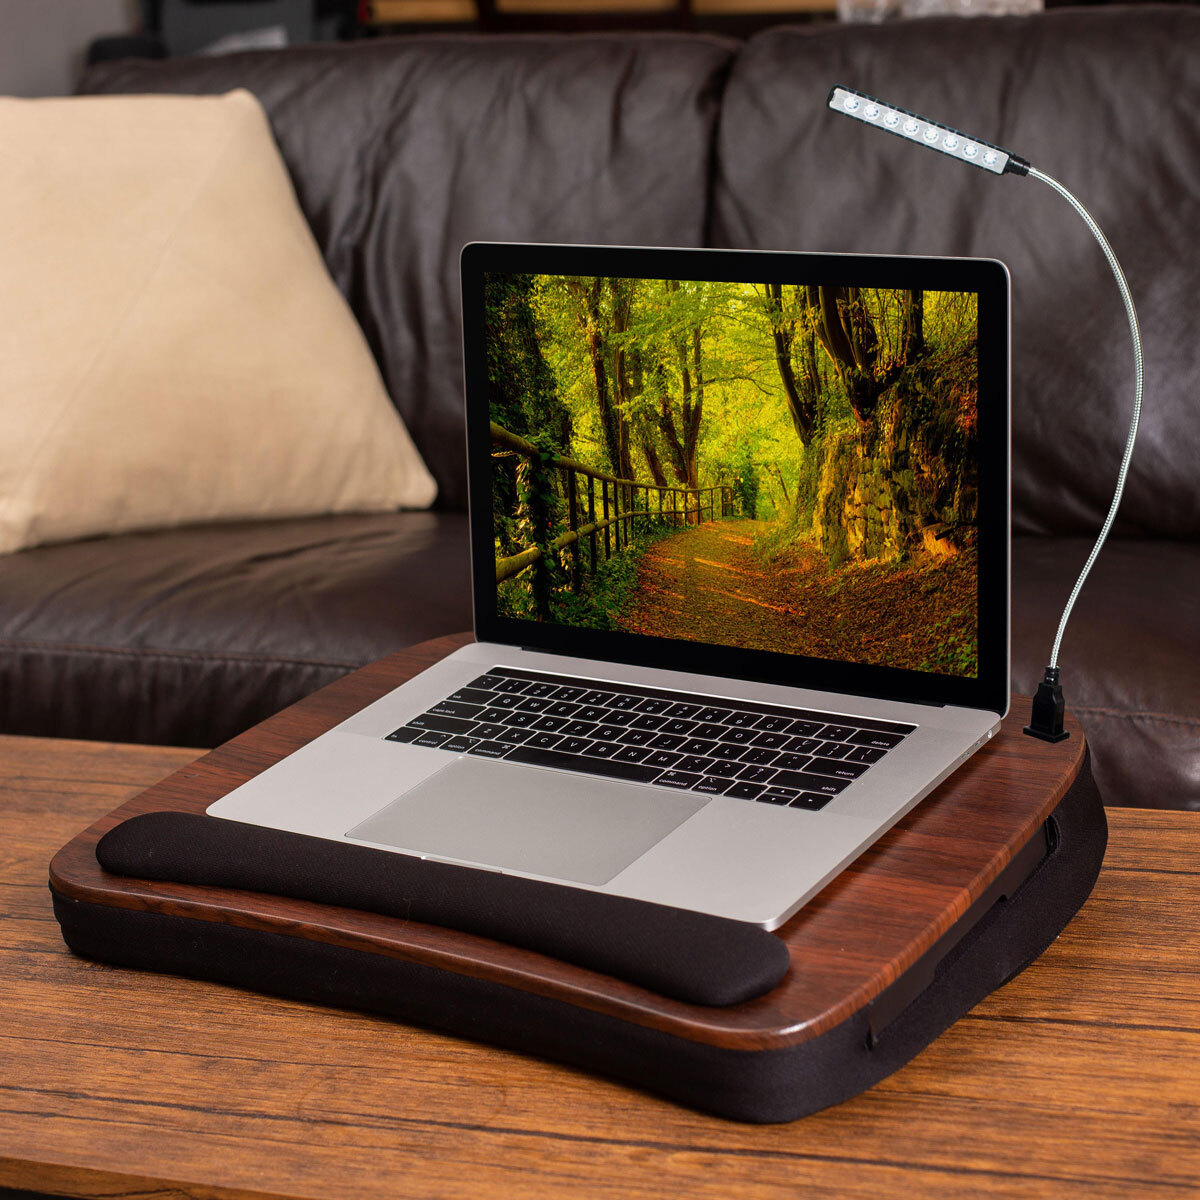 Birdrock Multi-Tasking Lap Desk with Mouse Deck and Light in Brown